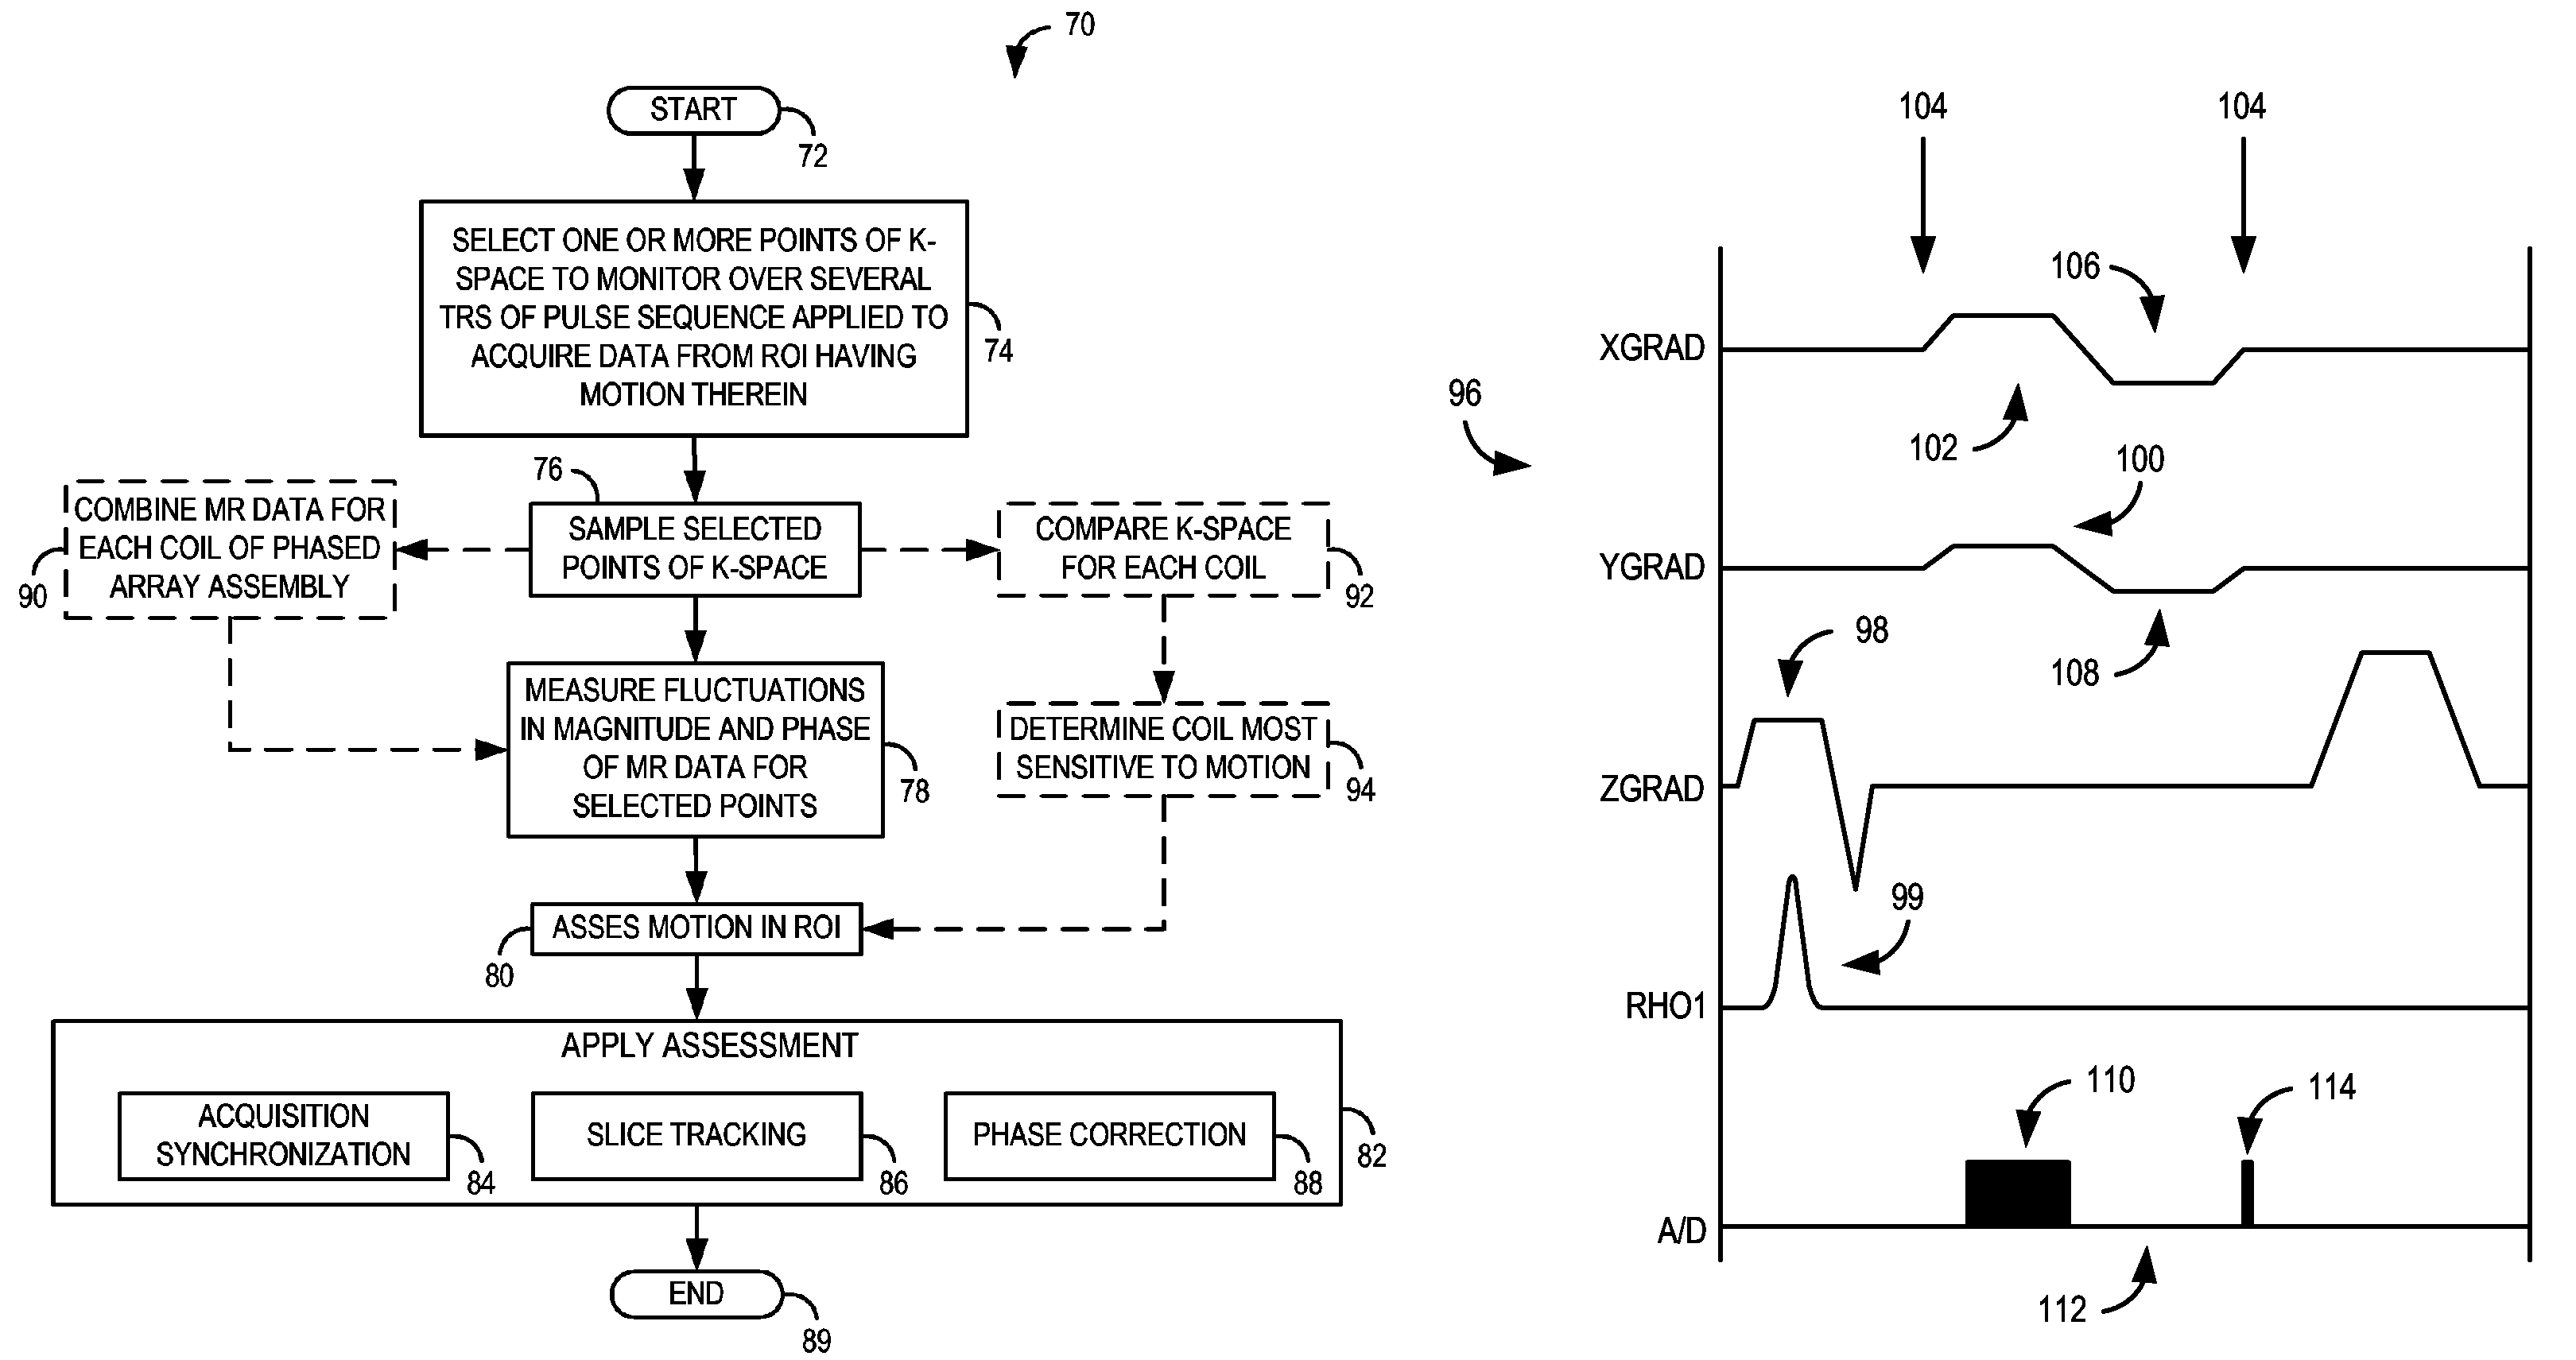 Method and system of determining motion in a region-of-interest directly and independently of k-space trajectory